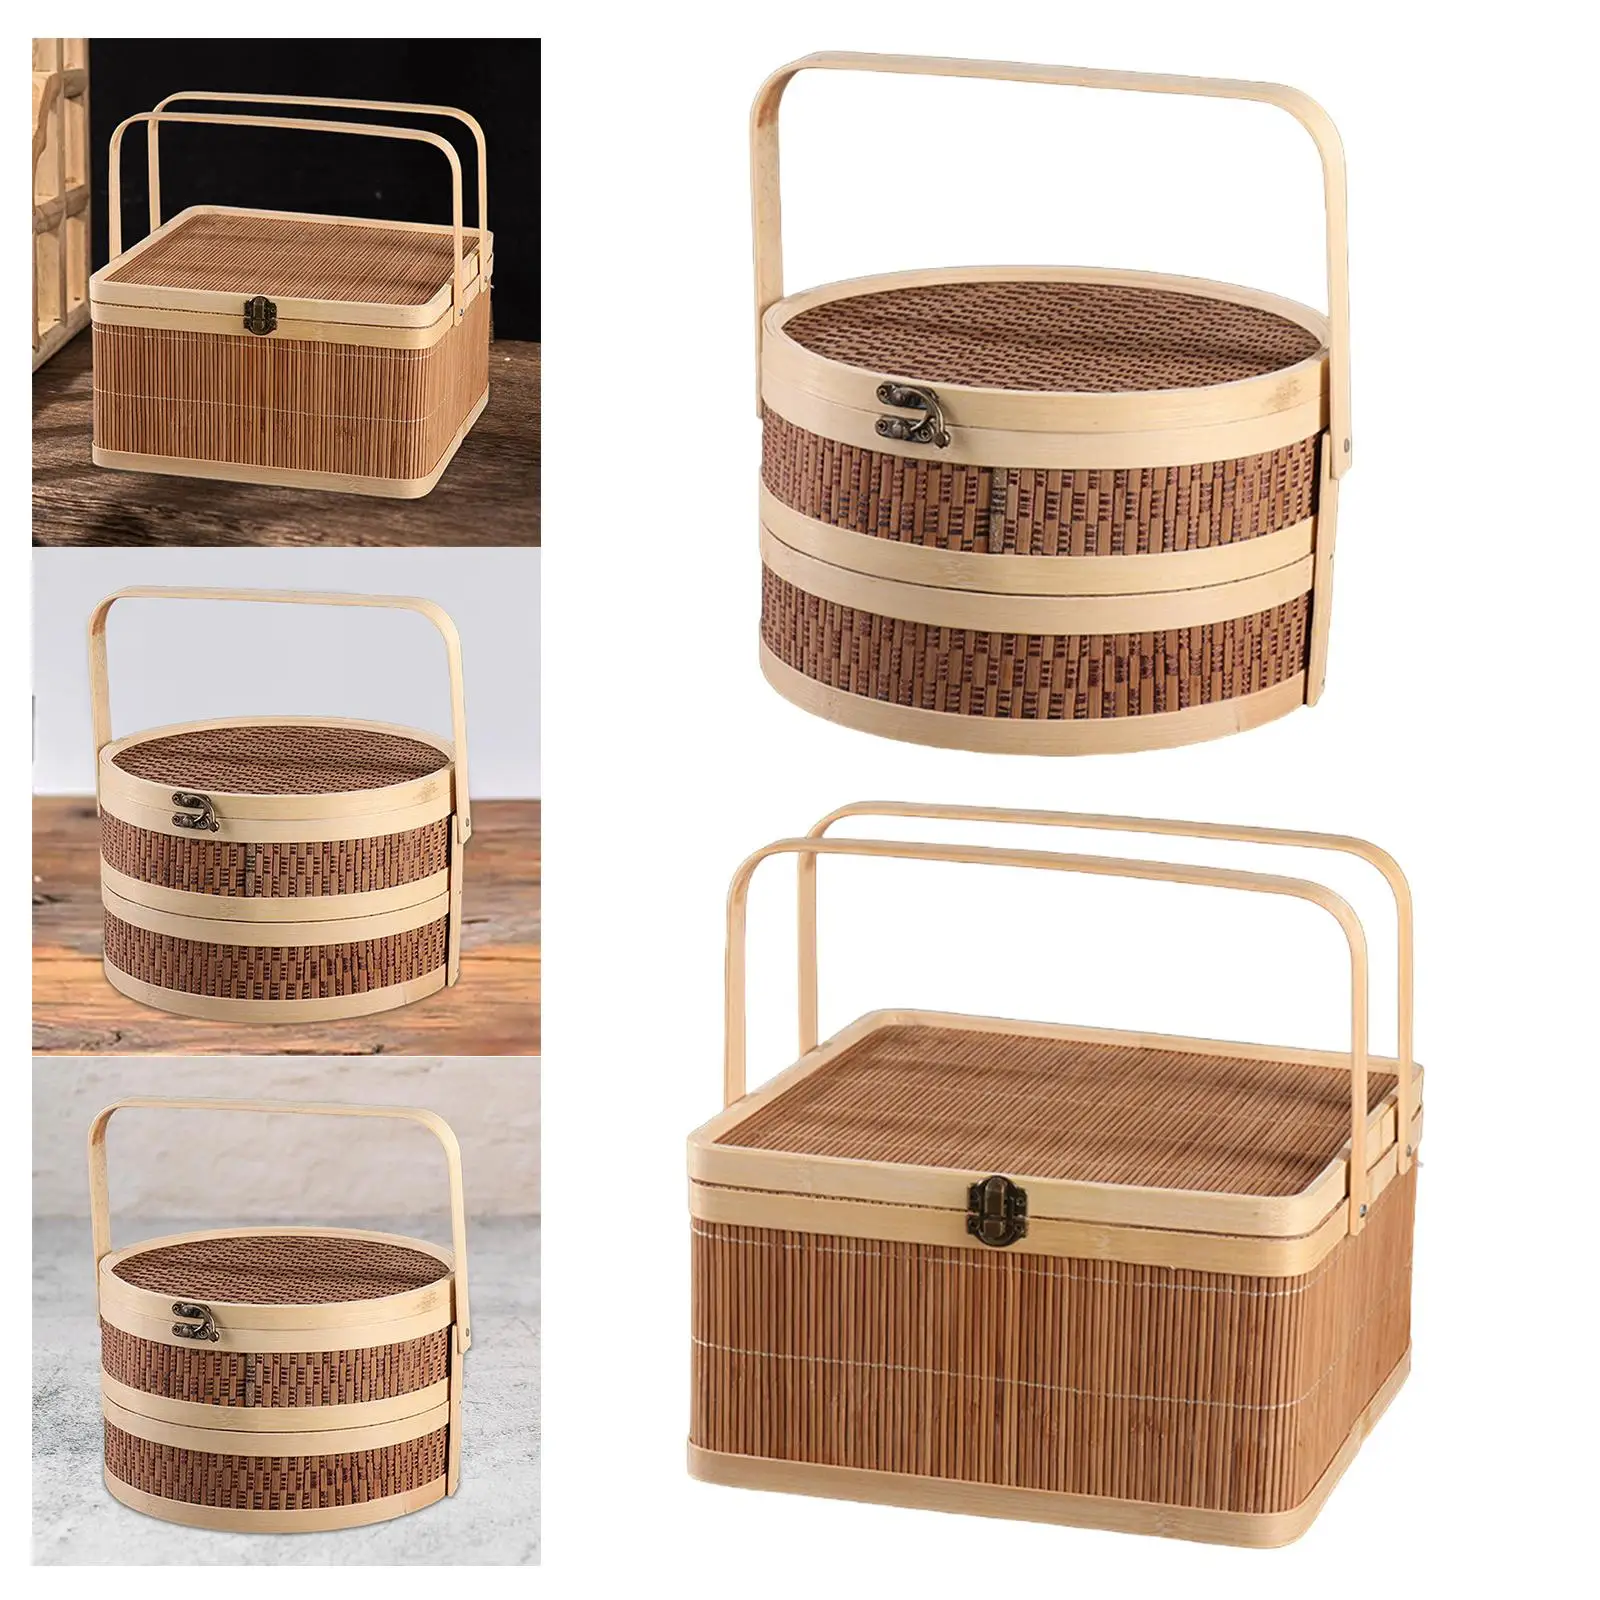 Bamboo Basket Serving Bread with Top Handle Cake Snacks Mooncake Gift Packing Basket Portable Organizer Food Bamboo Woven Basket